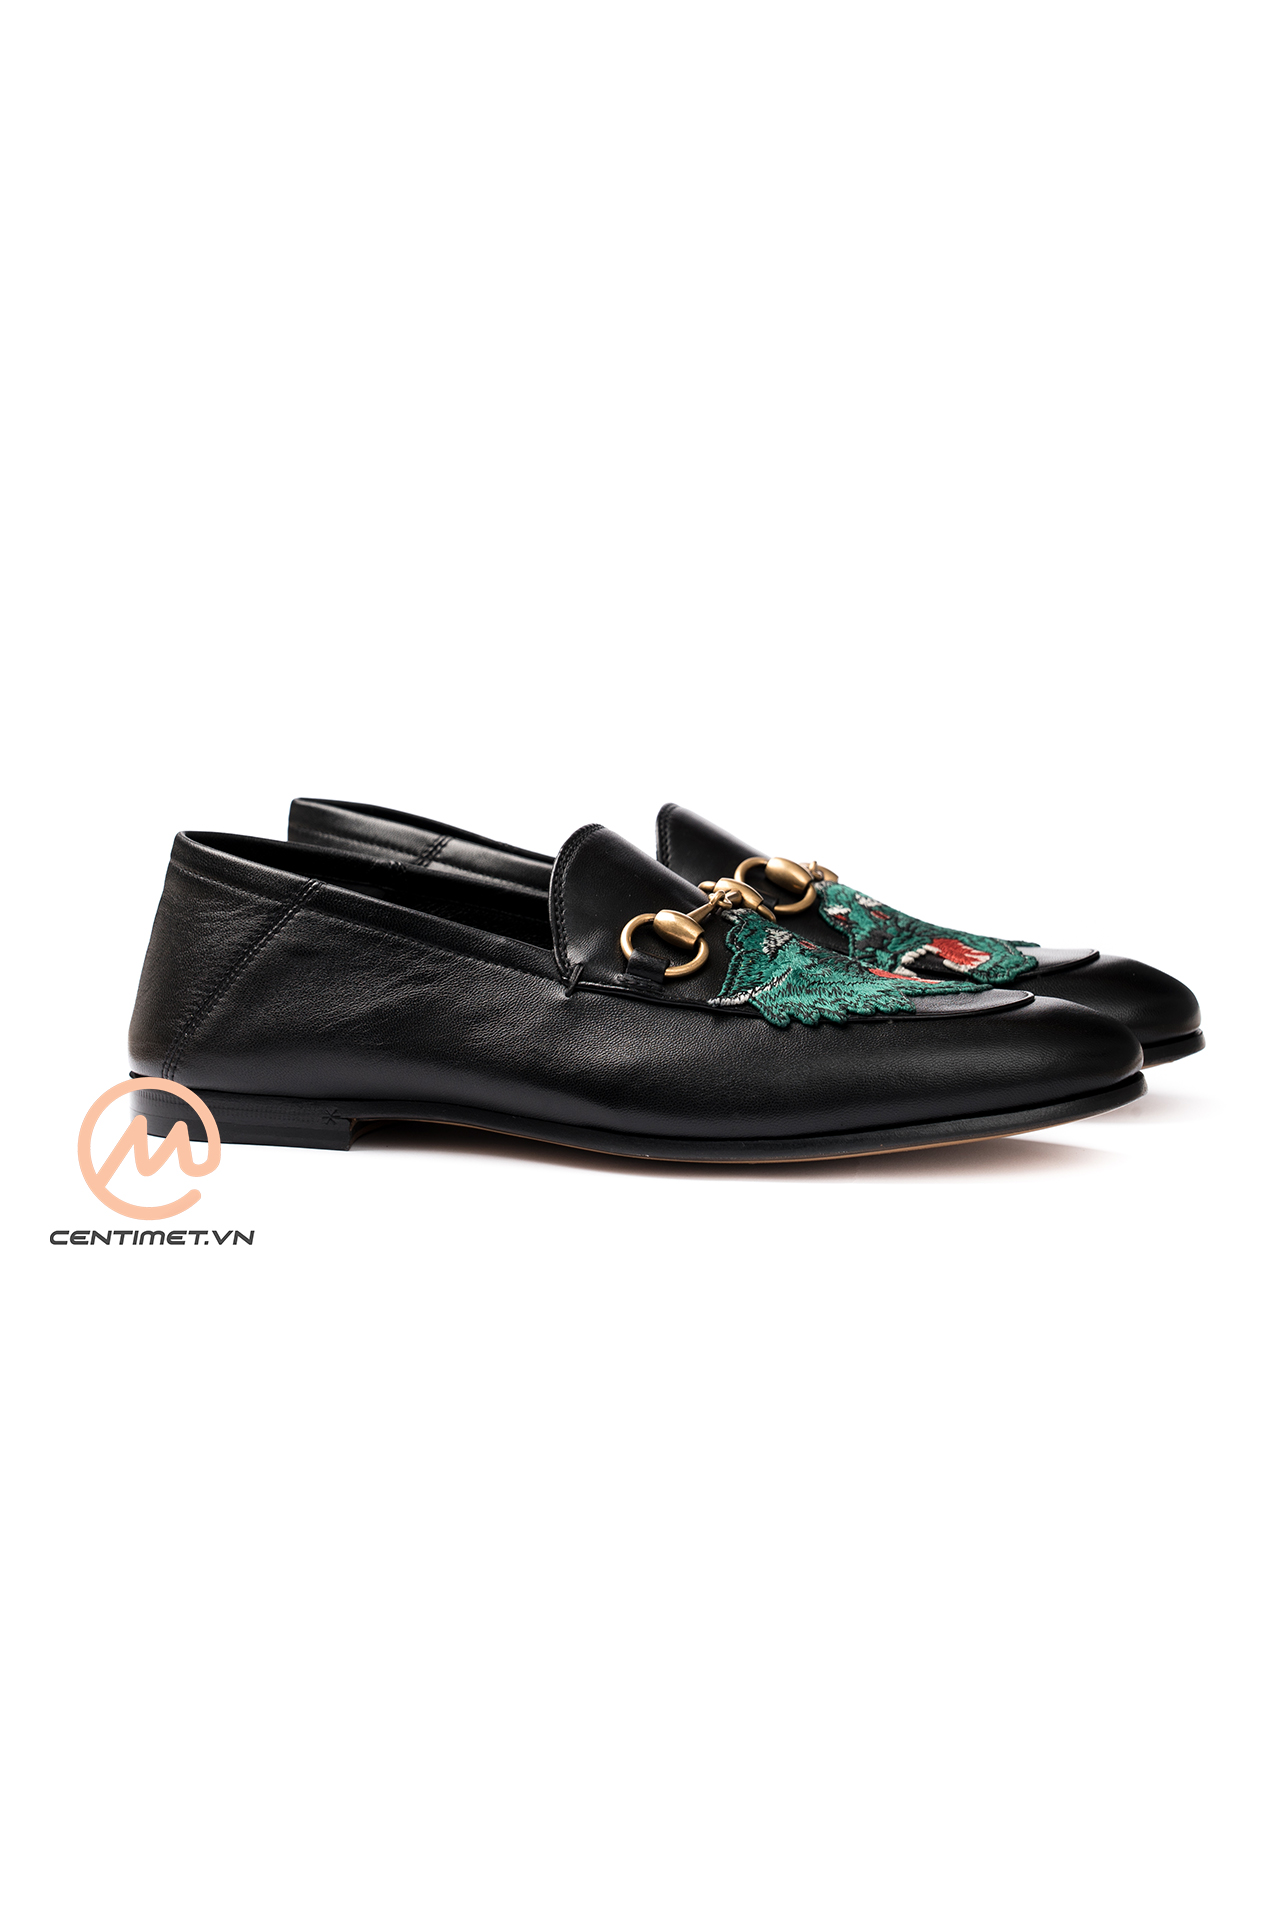 Giay Gucci Wolf Leather Loafer-2 (1)